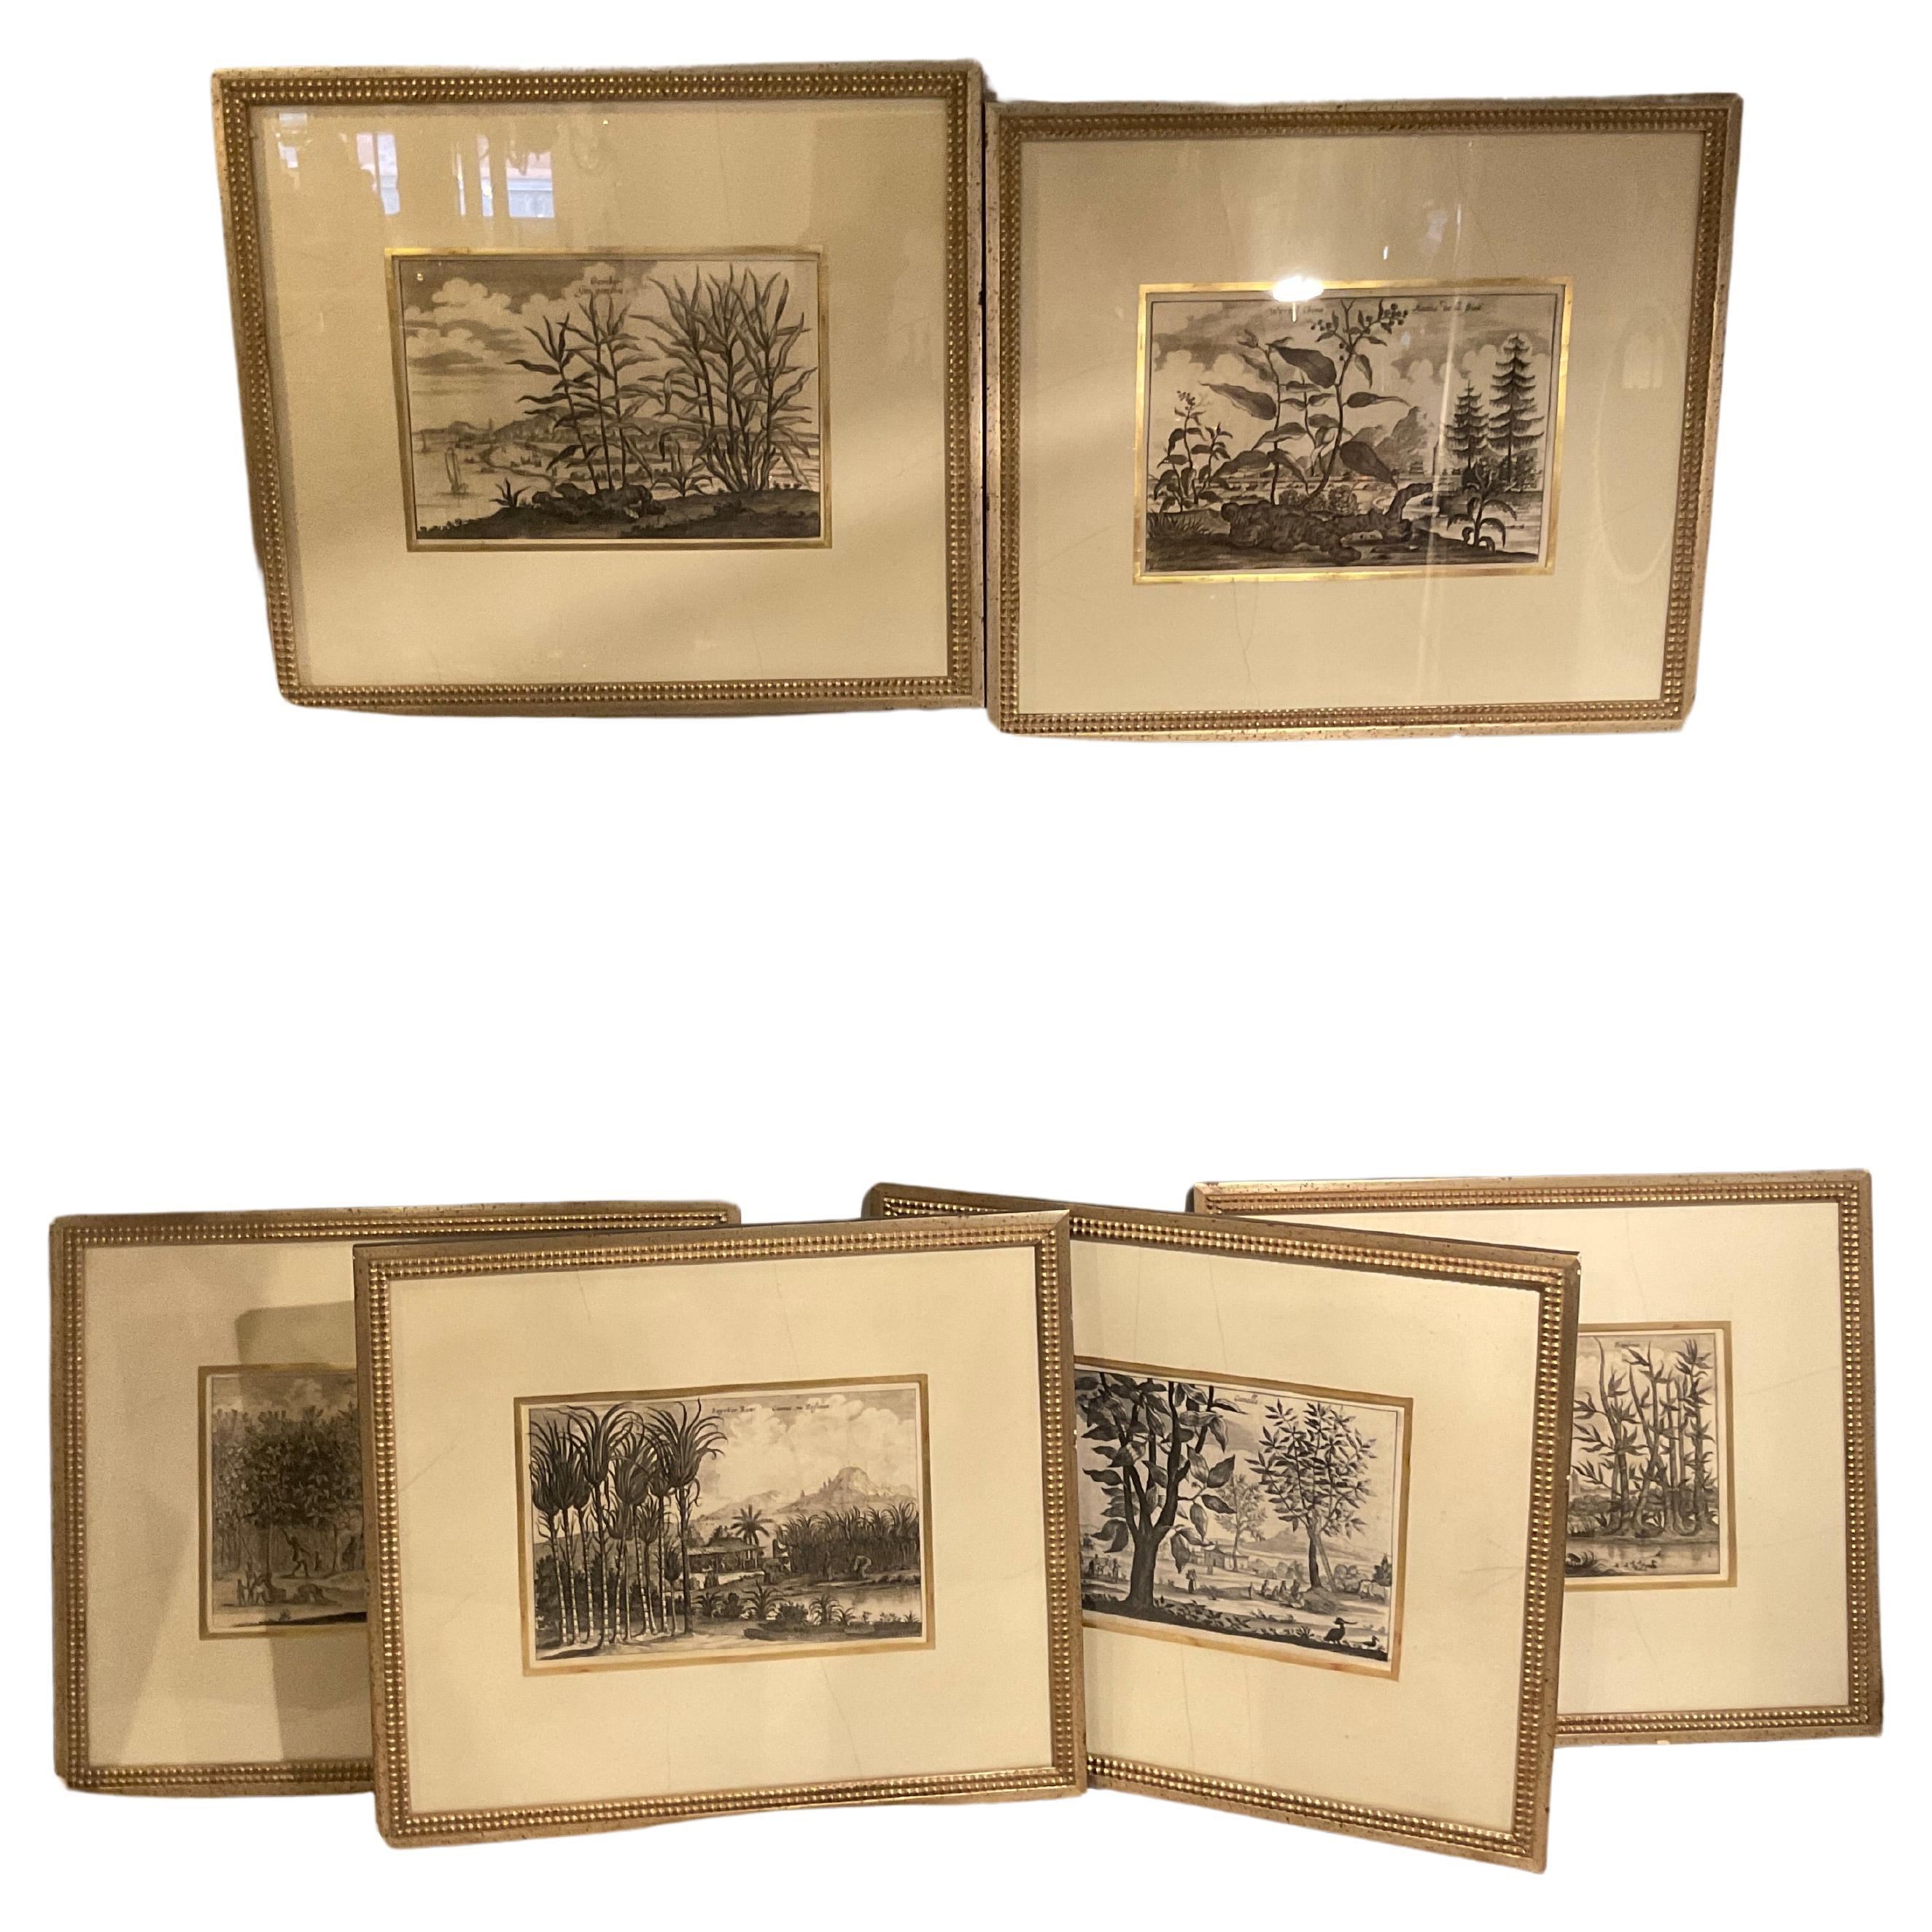 6 Soicher- Marin Tropical Landscape From Asia Prints In Silver Leaf Frames